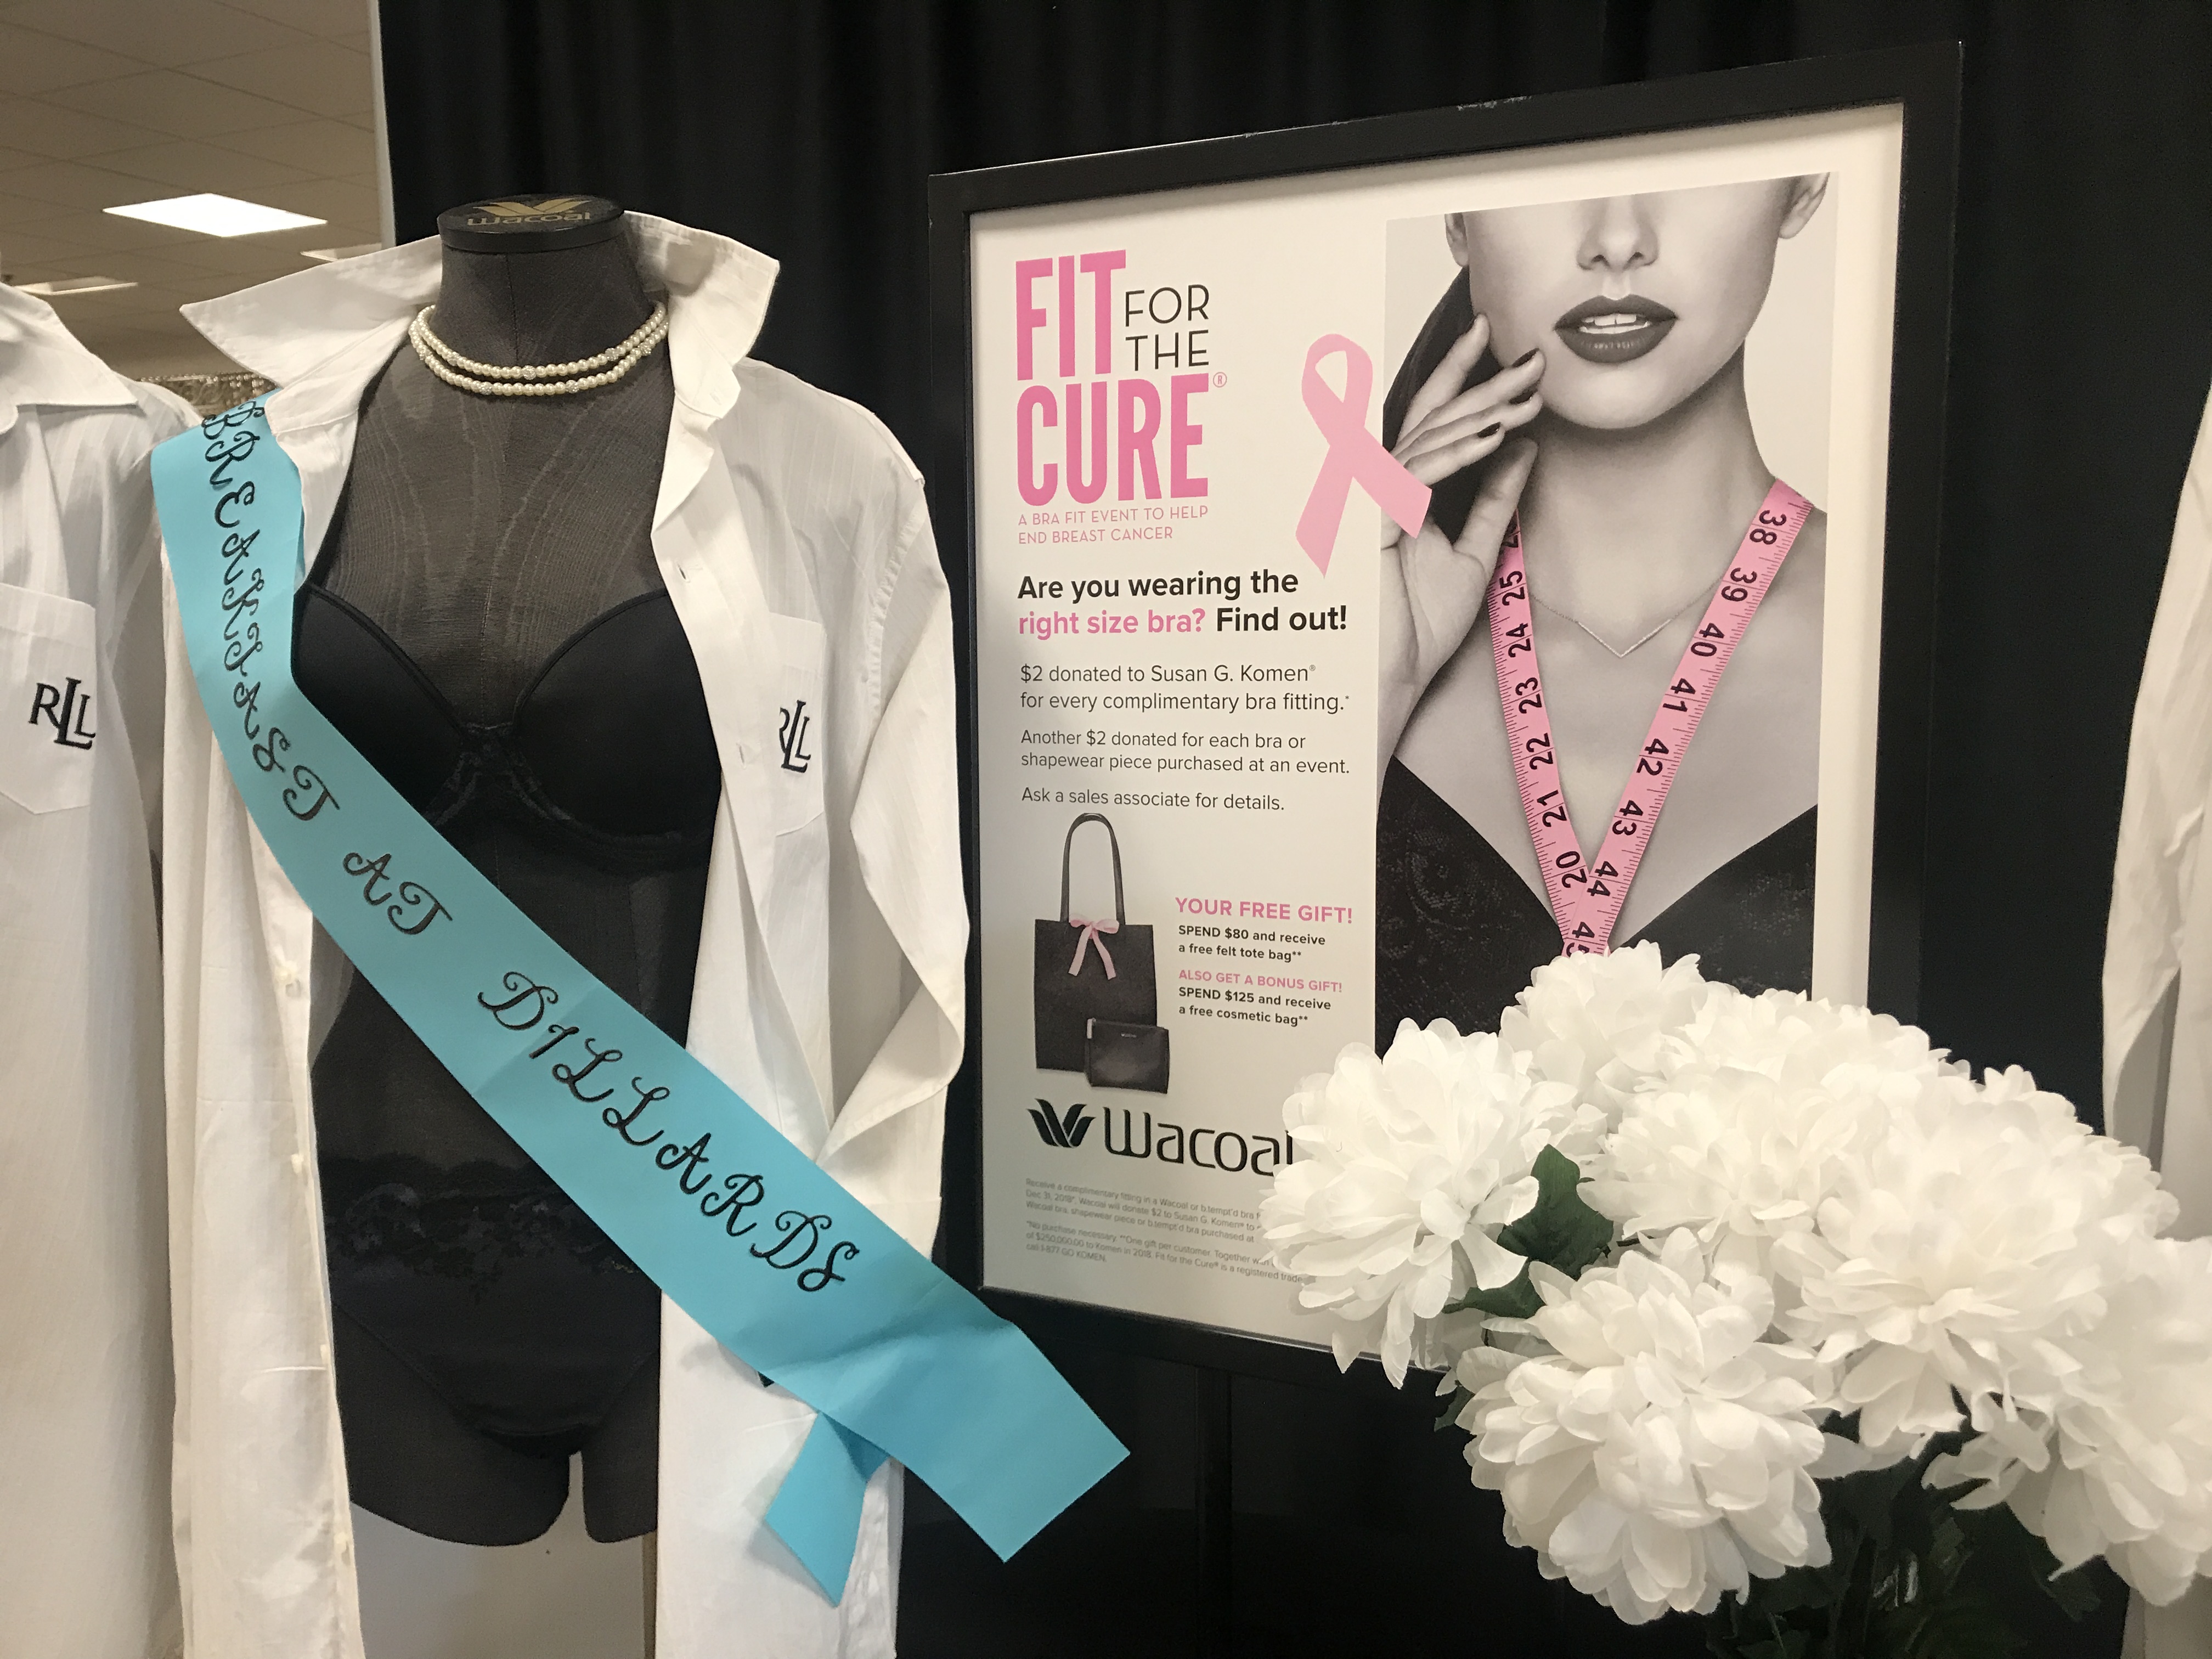 Springfield's Fit for the Cure this Friday